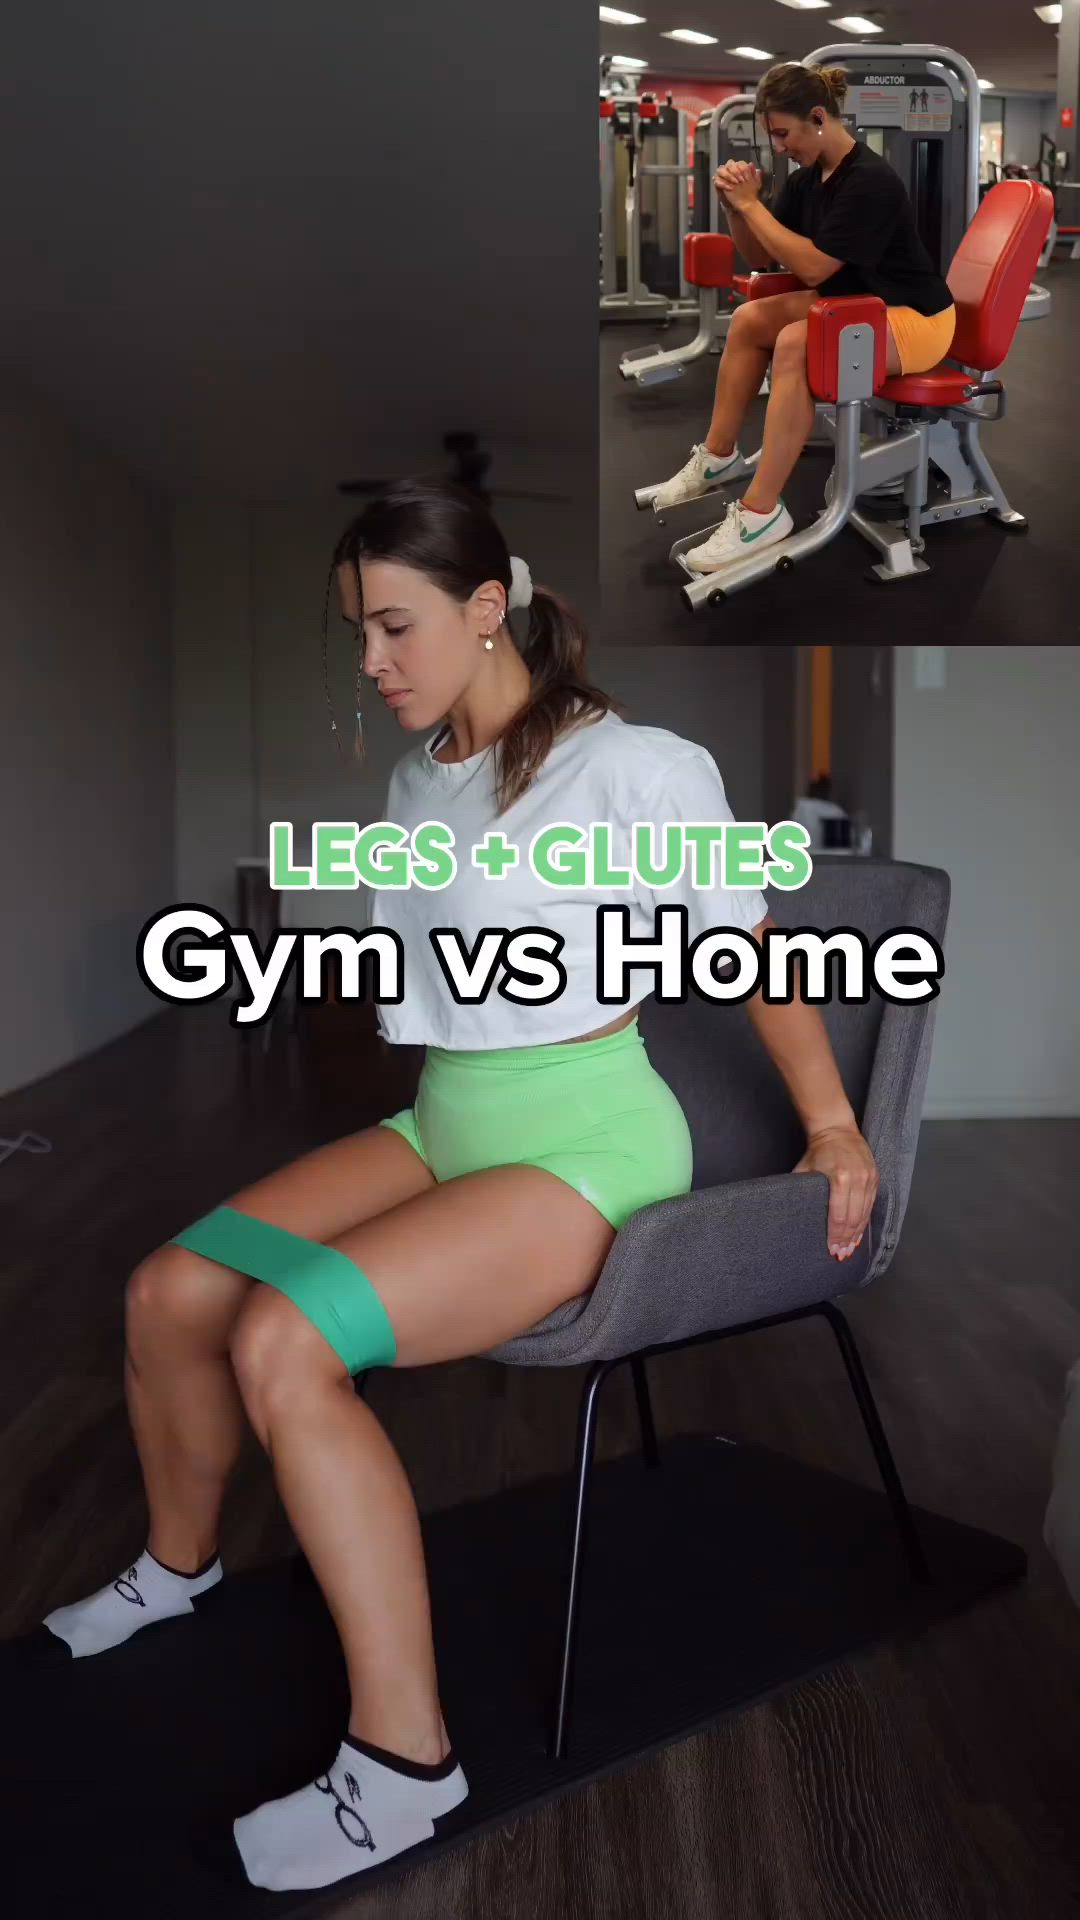 This may contain: a woman sitting on a chair in front of a gym machine with the words leg & glutes gym vs home